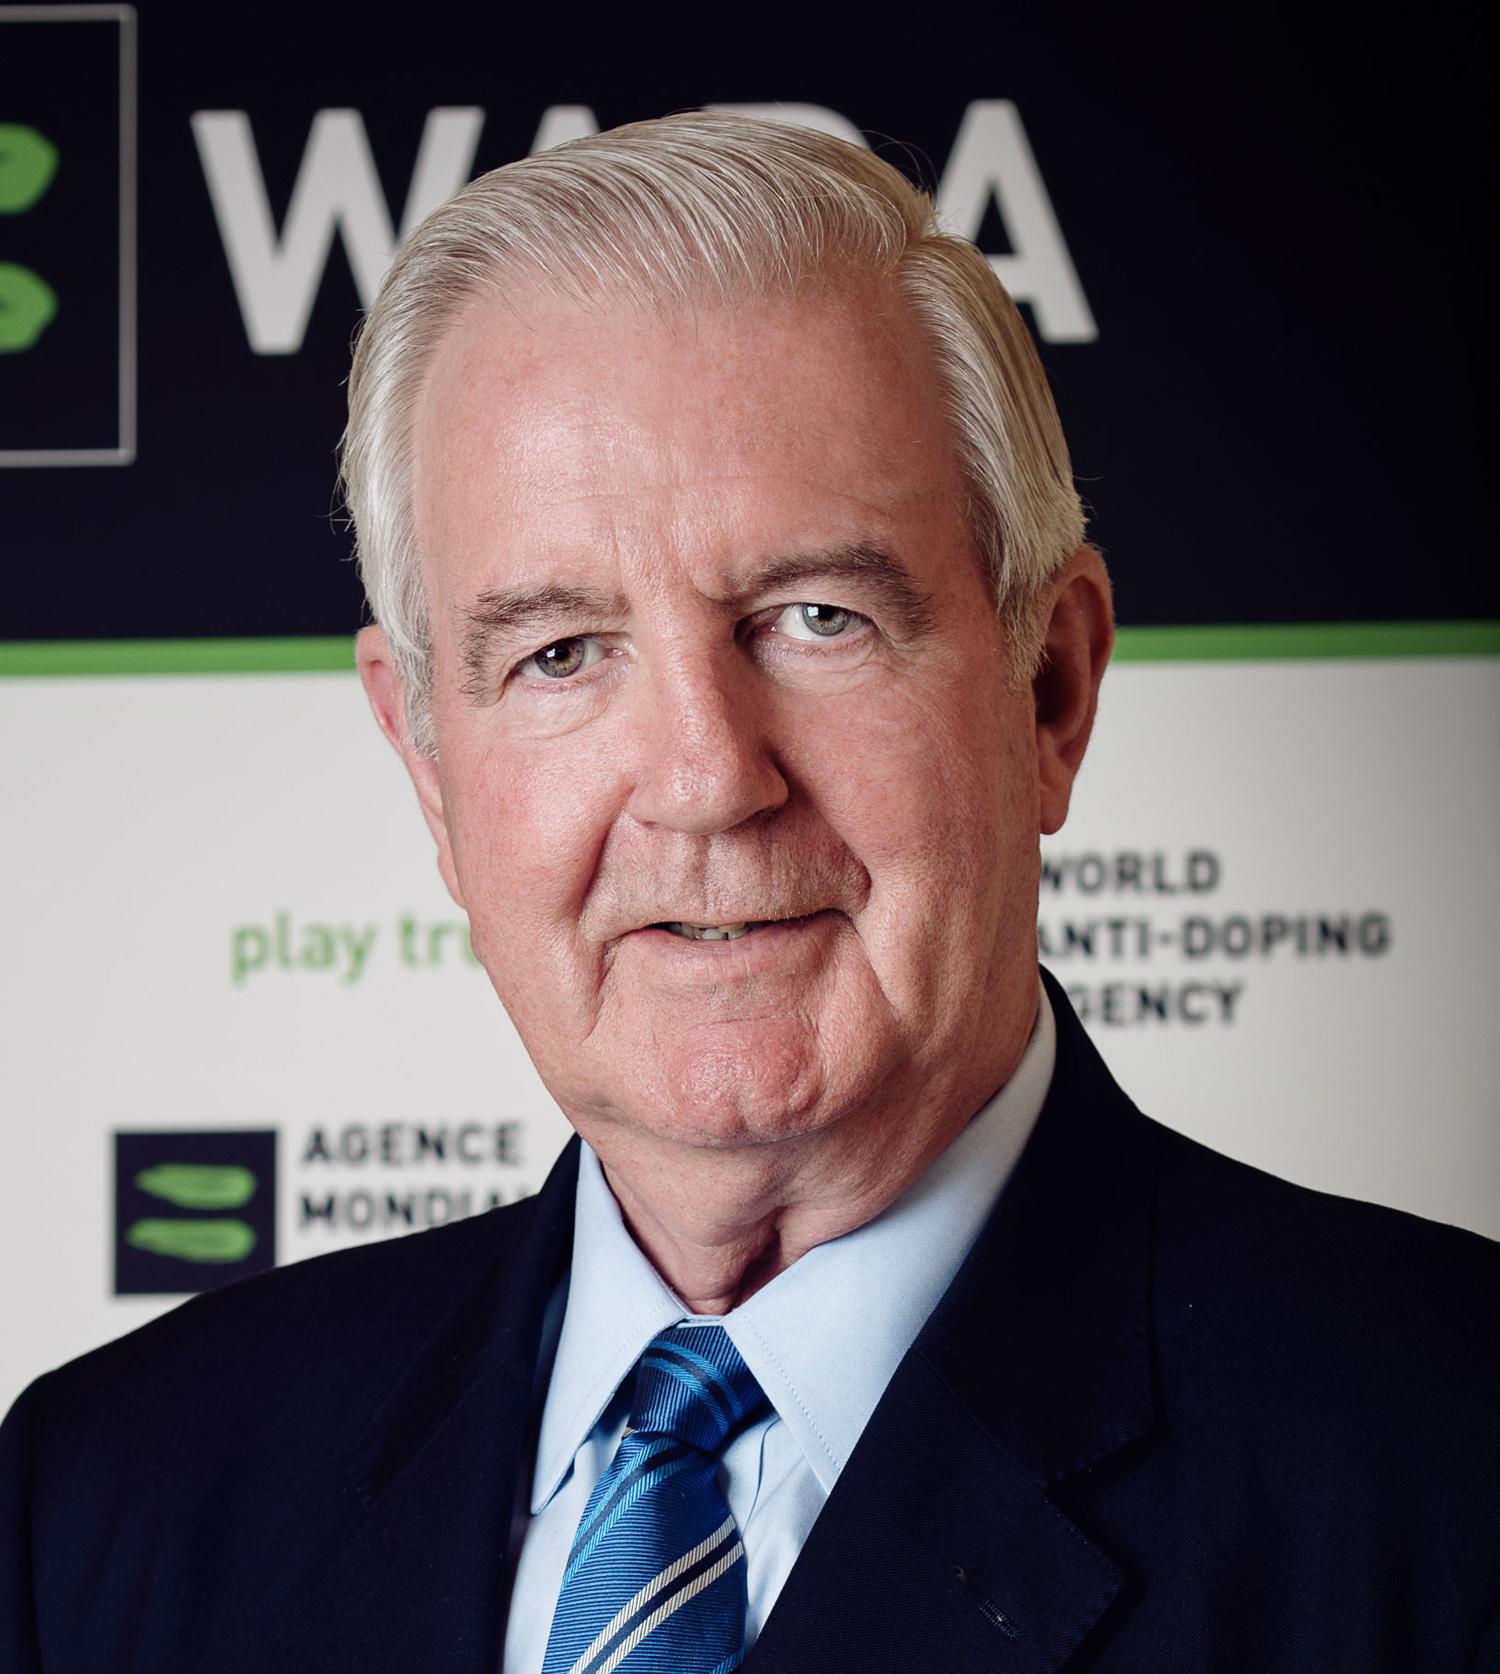 WADA boss Sir Craig Reedie was given a knight grand cross, one of the highest honours in the British orders system / WADA